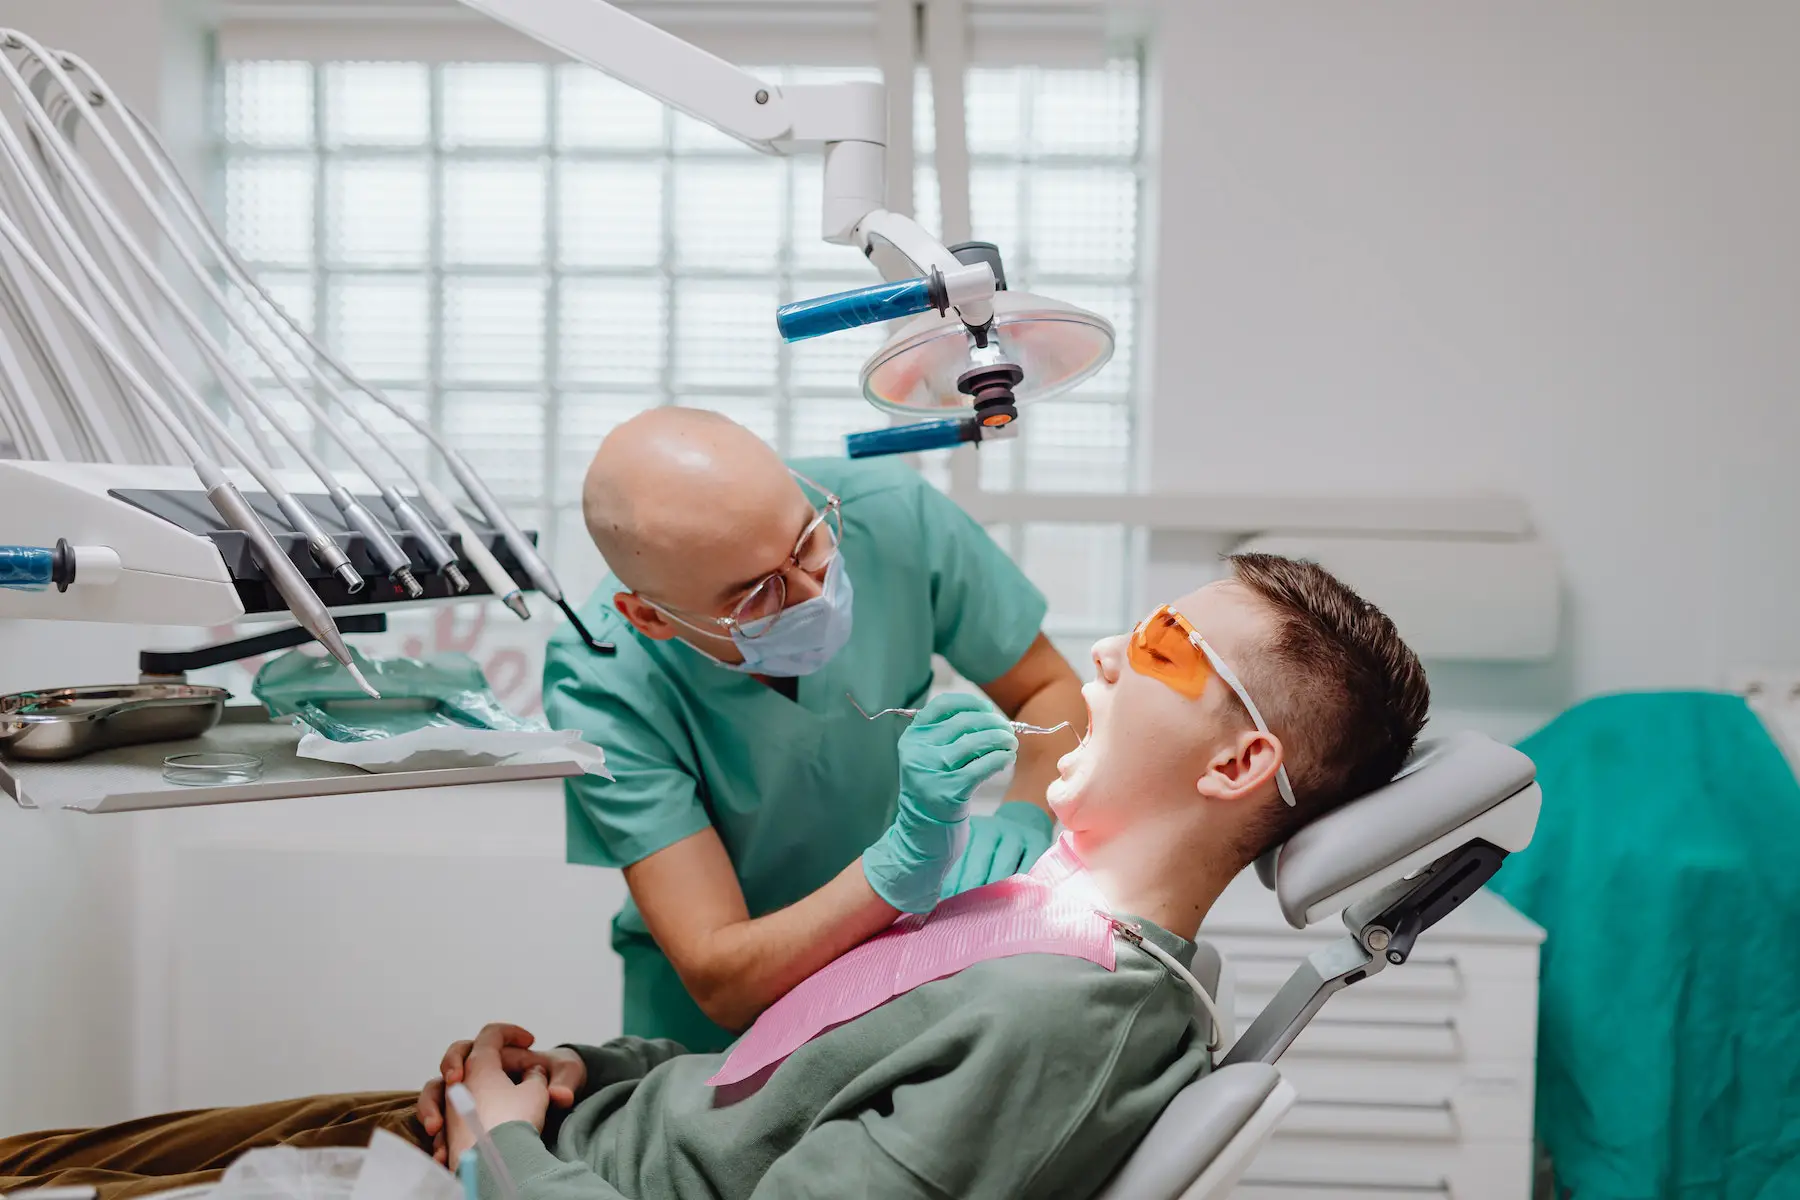 Dentist inspecting mouth of patient in the exam chair